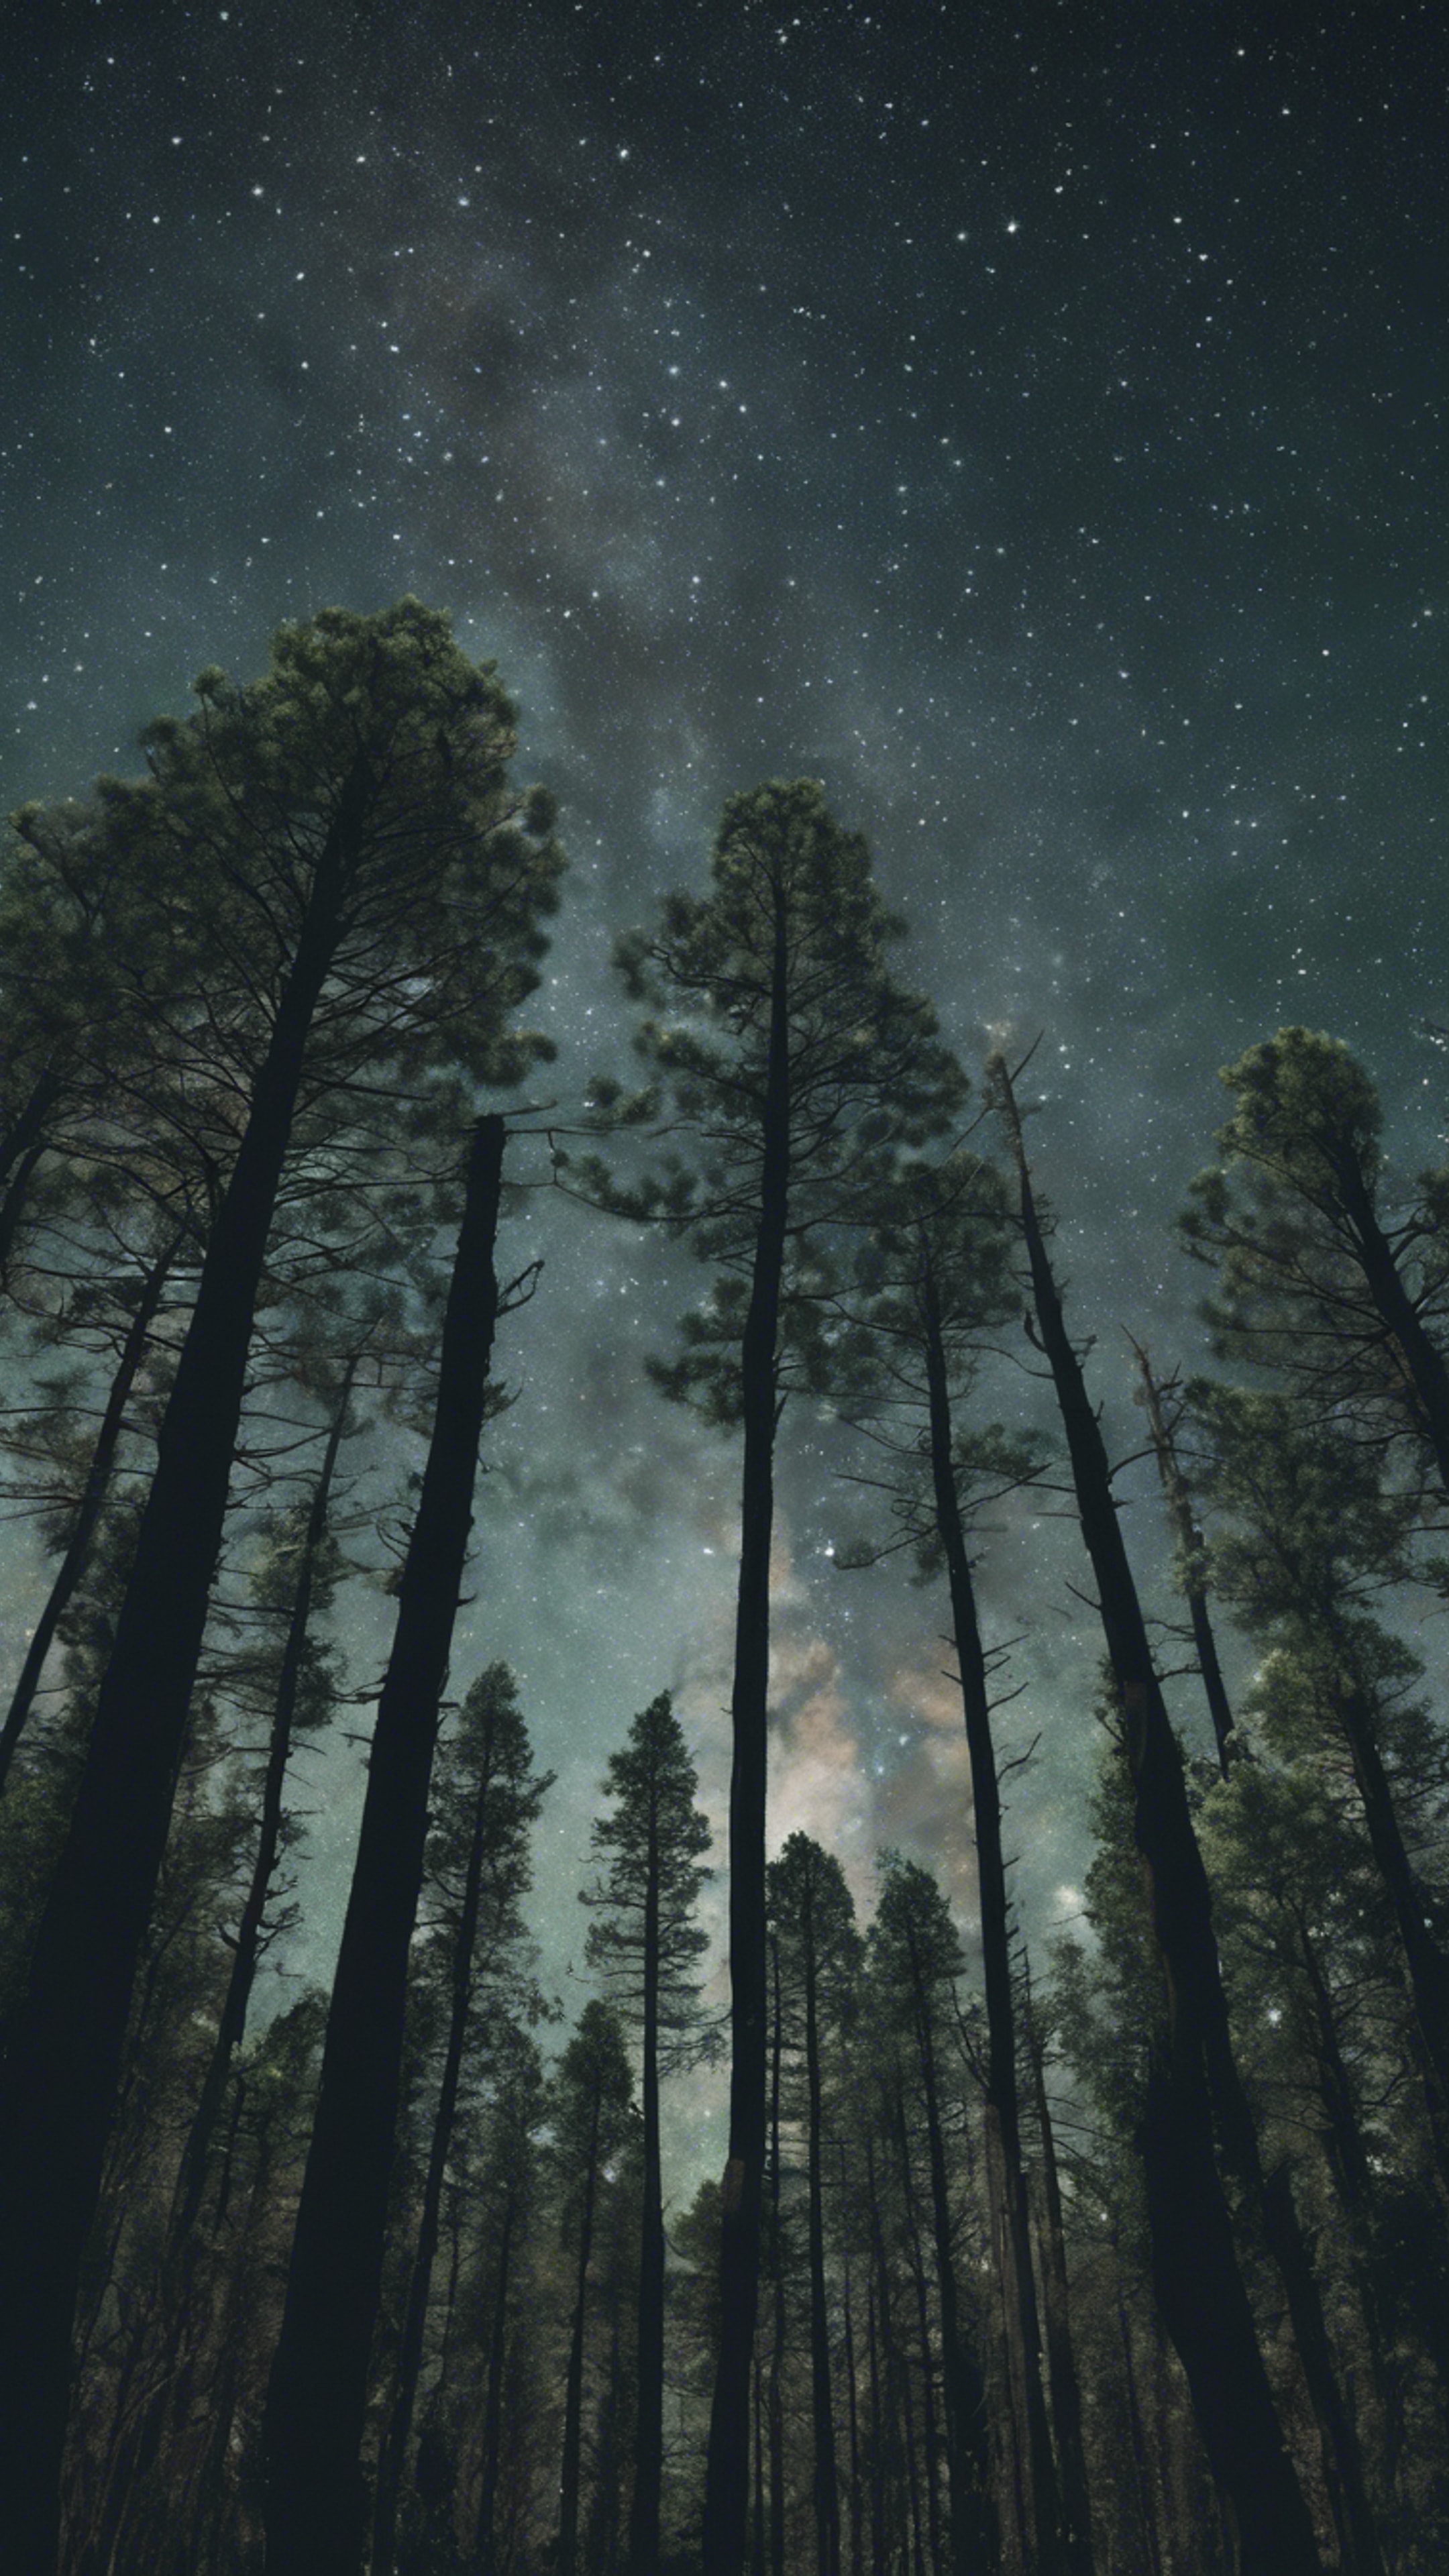 A wilderness scene with tall, dark green pine trees occluding the stars. Tapet[a450718e497a48169b60]